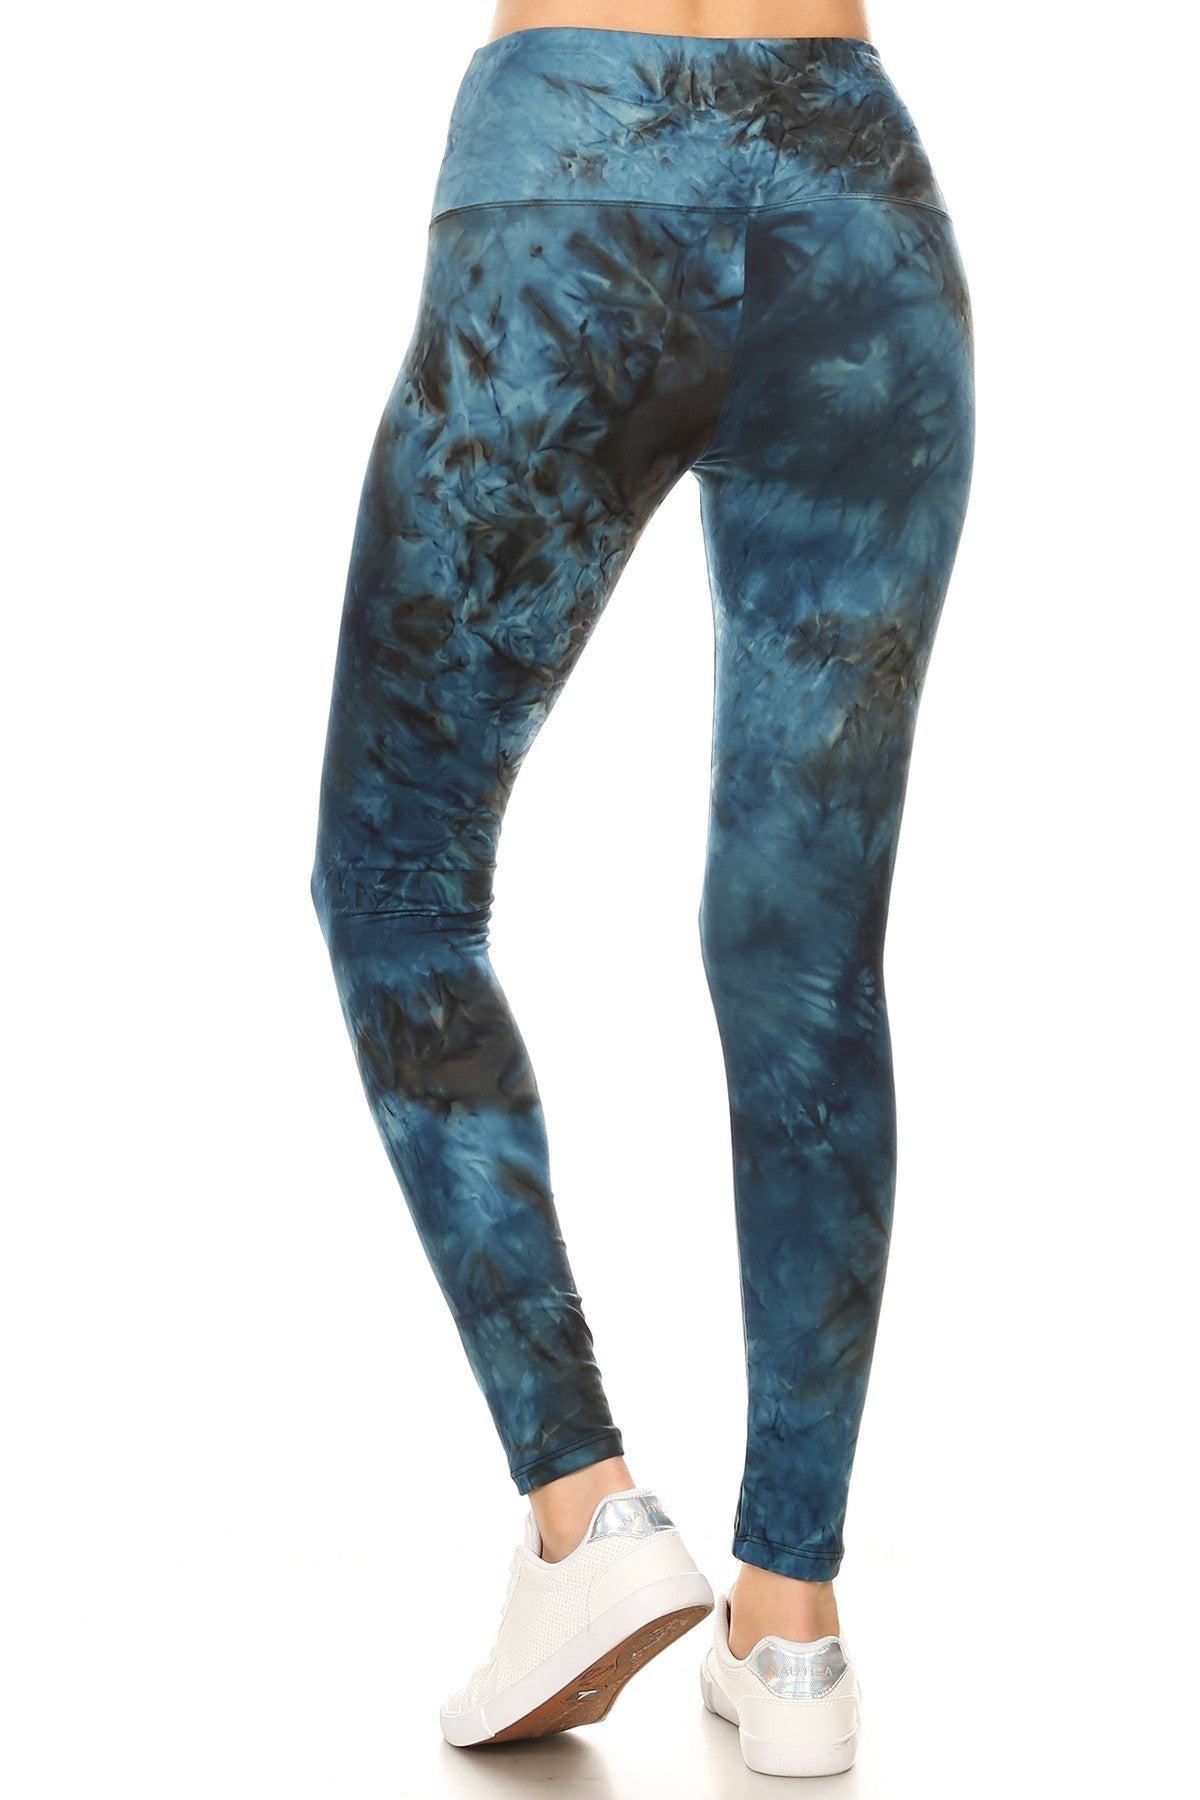 5-inch Long Yoga Style Banded Lined Tie Dye Printed Knit Legging With High Waist Blue Zone Planet